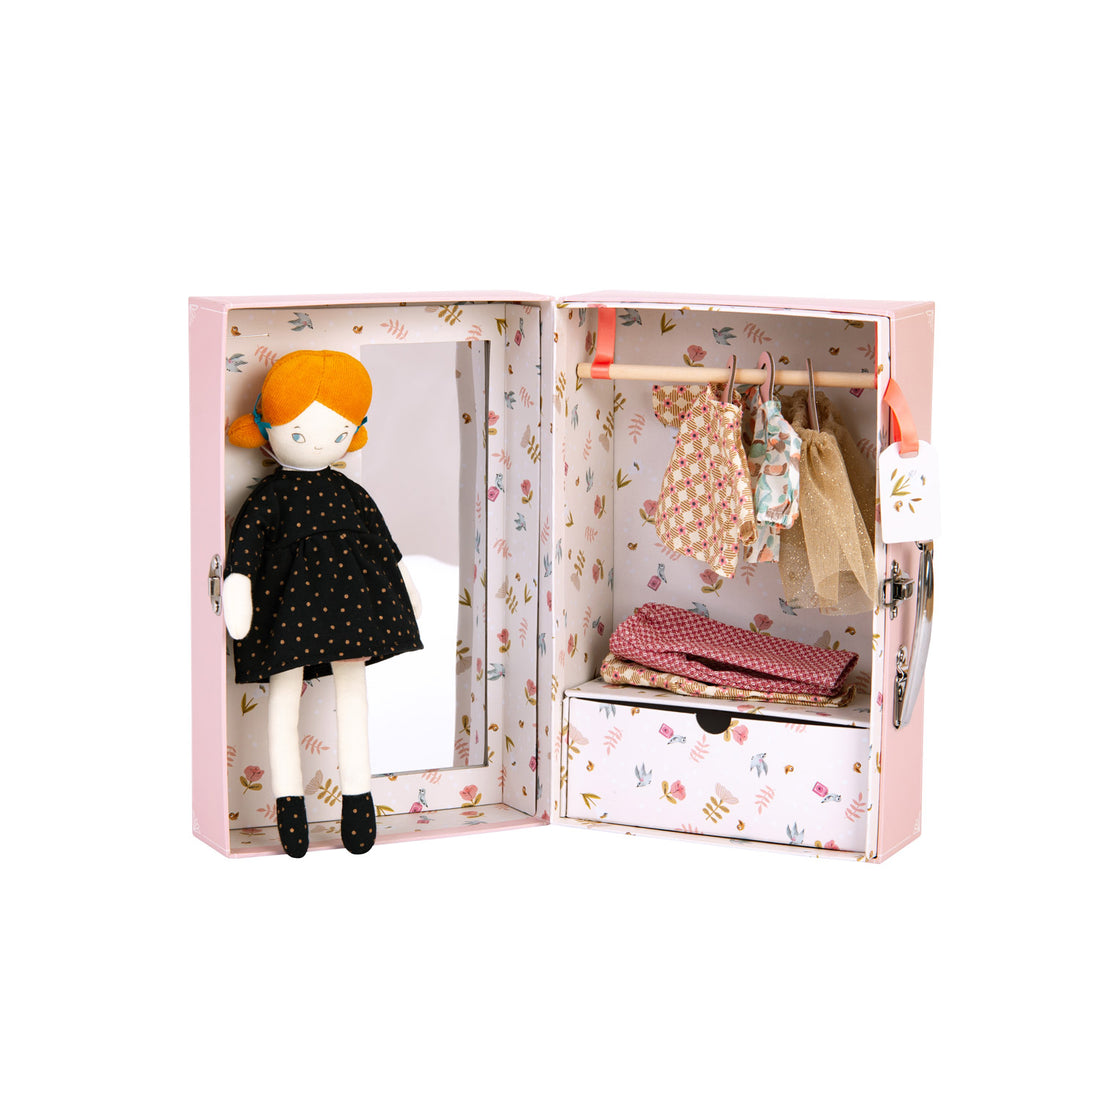 moulin-roty-les-parisiennes-mlle-blanches-little-wardrobe-suitcase-moul-642564